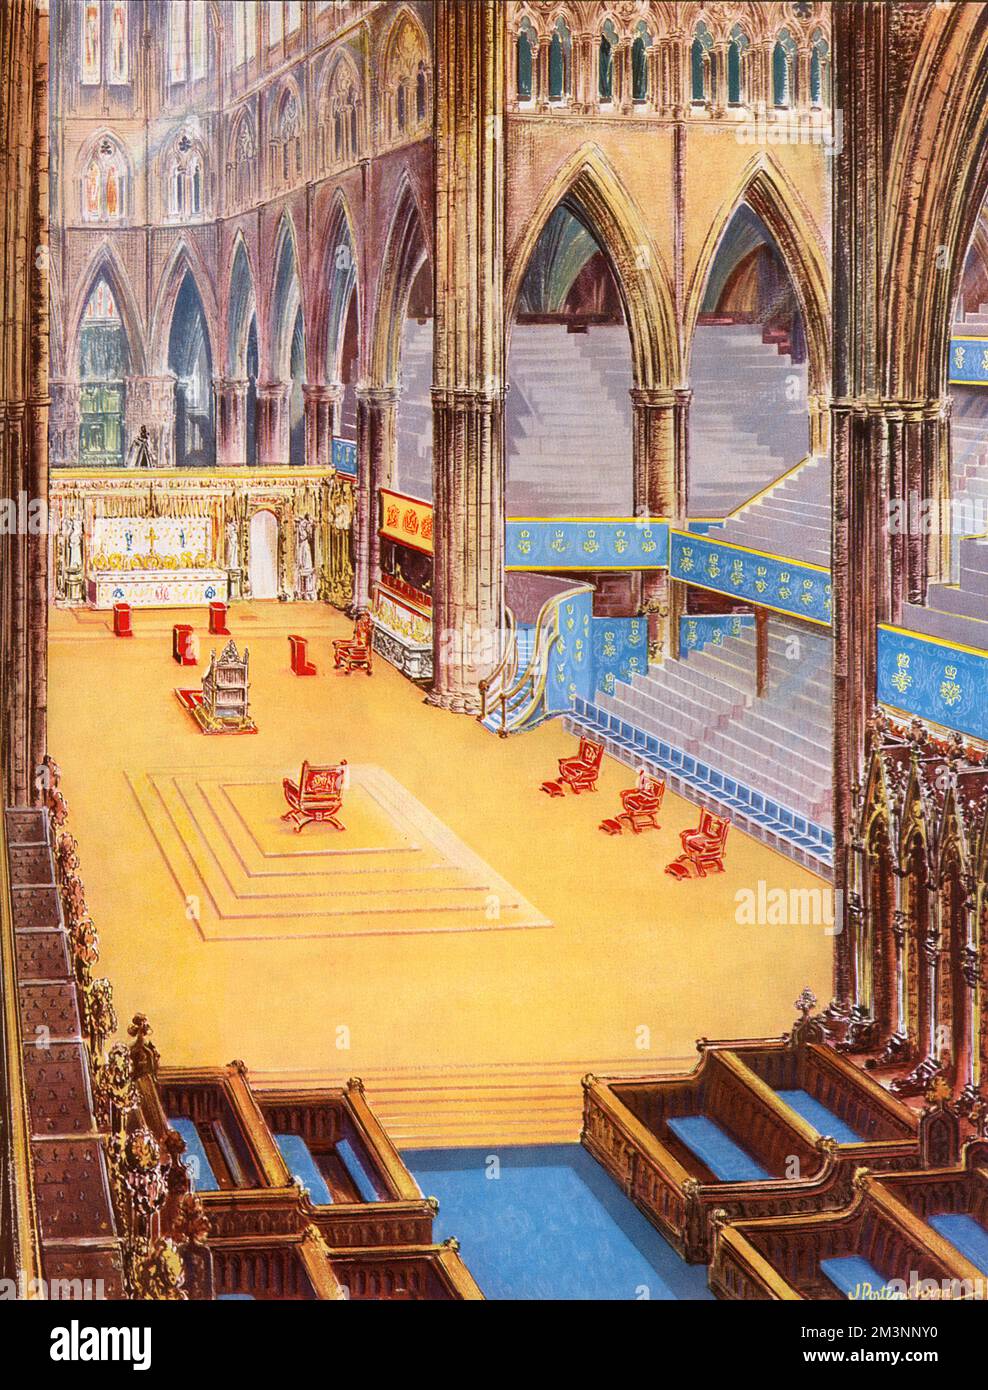 Illustration of the interior of Westminster Abbey, looking towards the High Altar and featuring the special chairs used as part of the Coronation Service.   1953 Stock Photo